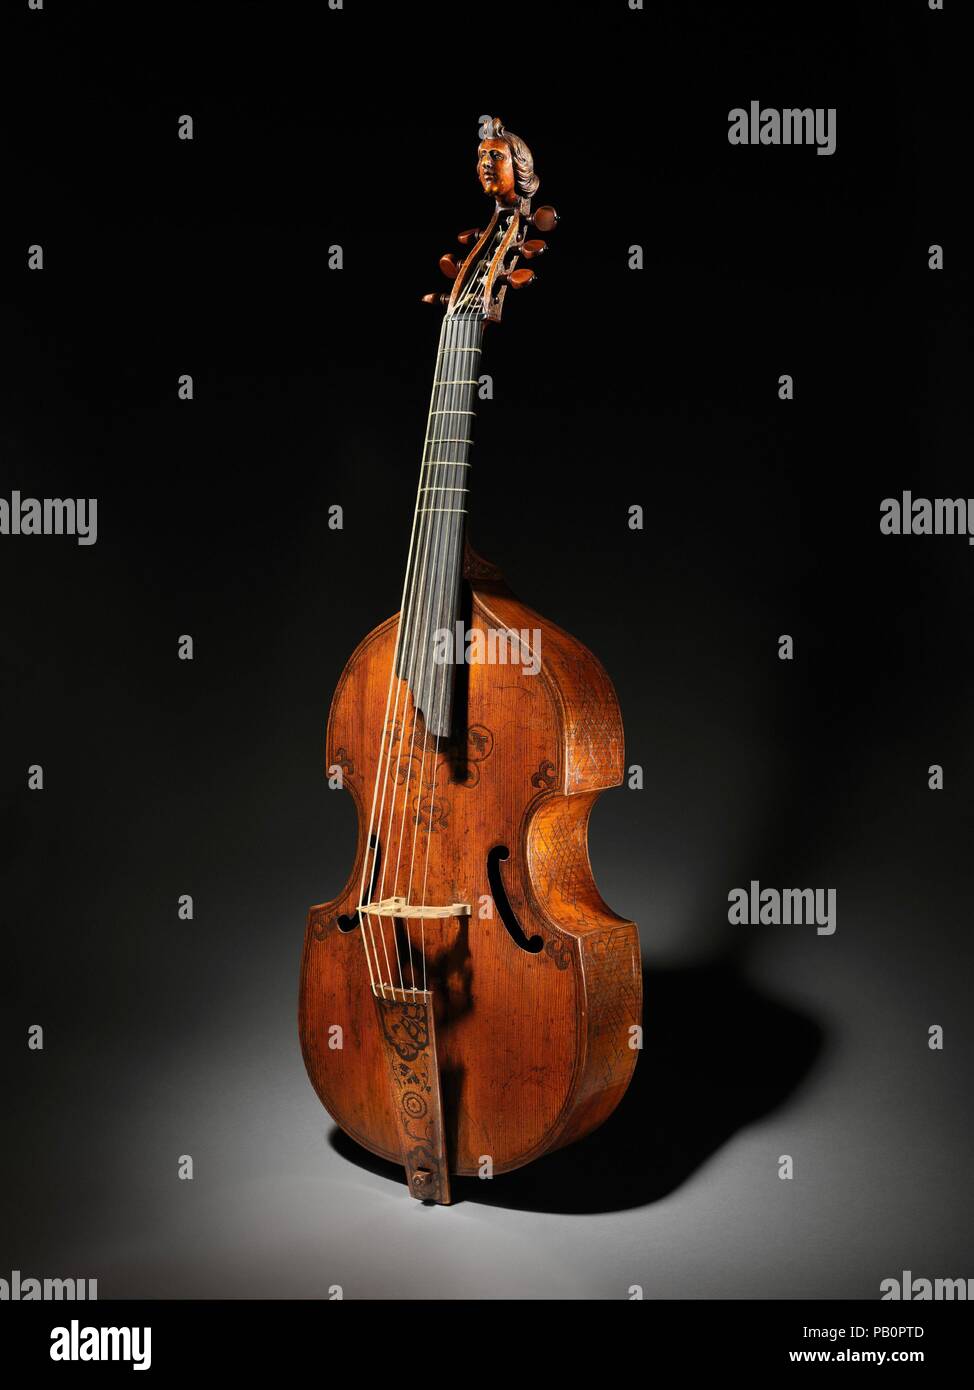 Violin Family High Resolution Stock Photography and Images - Alamy